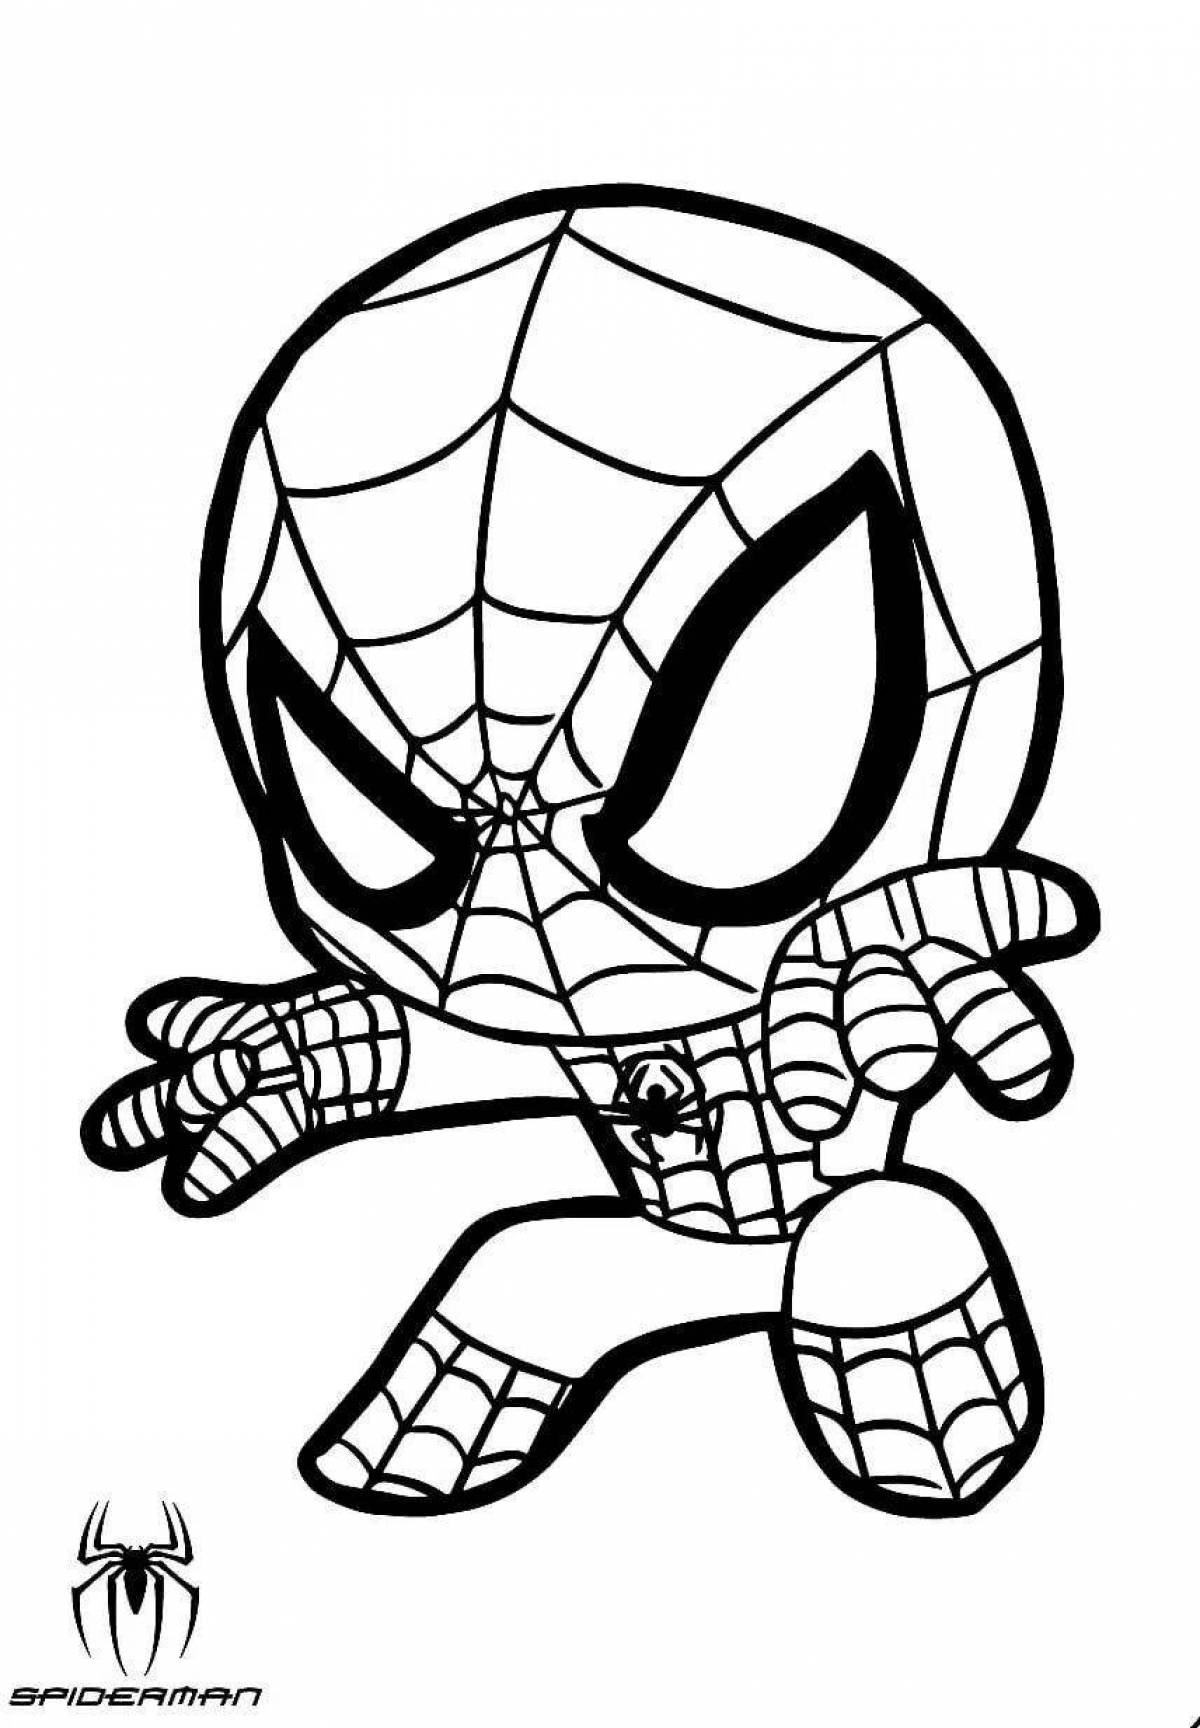 Spider-Man Animated Christmas Coloring Page